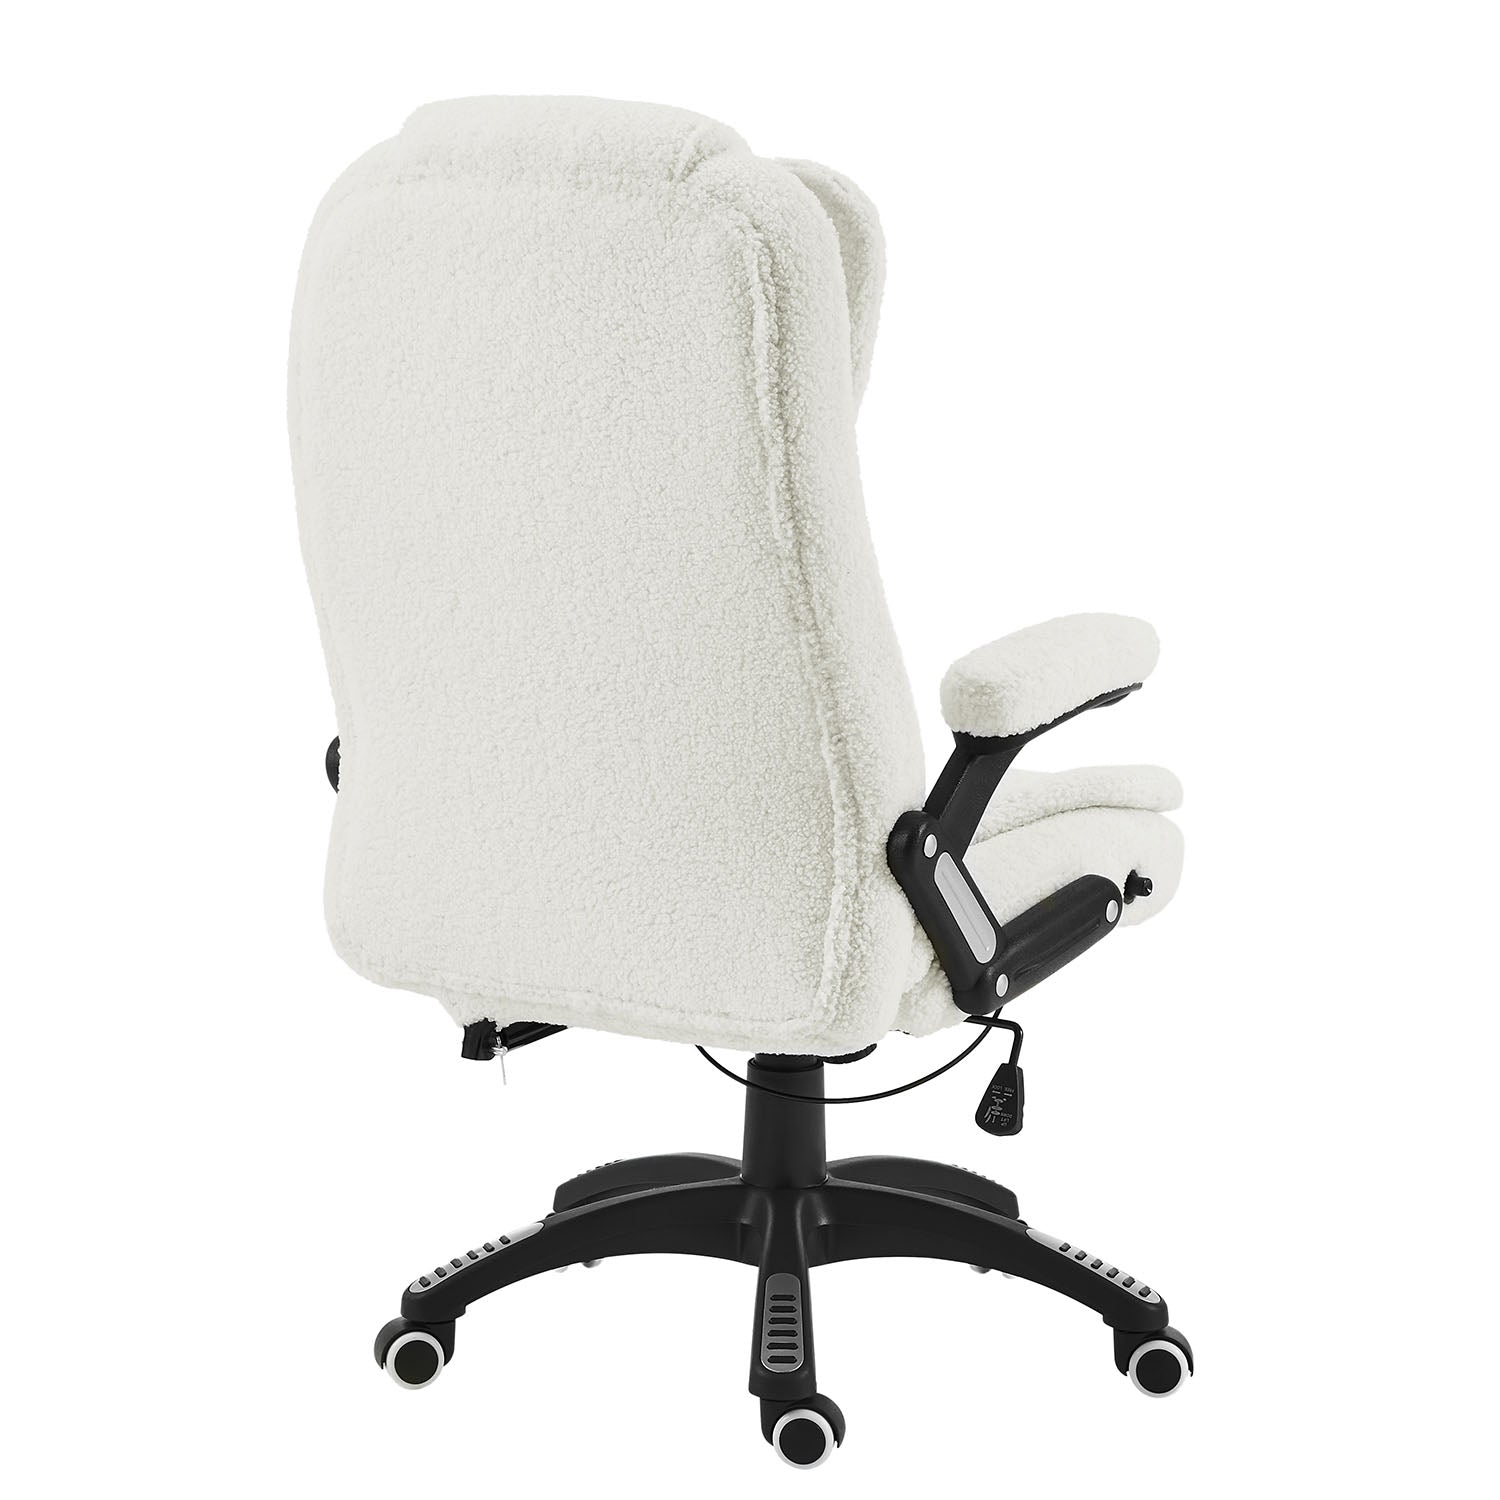 Cherry Tree Furniture Executive Recline Extra Padded Office Chair Standard, MO17 White Teddy